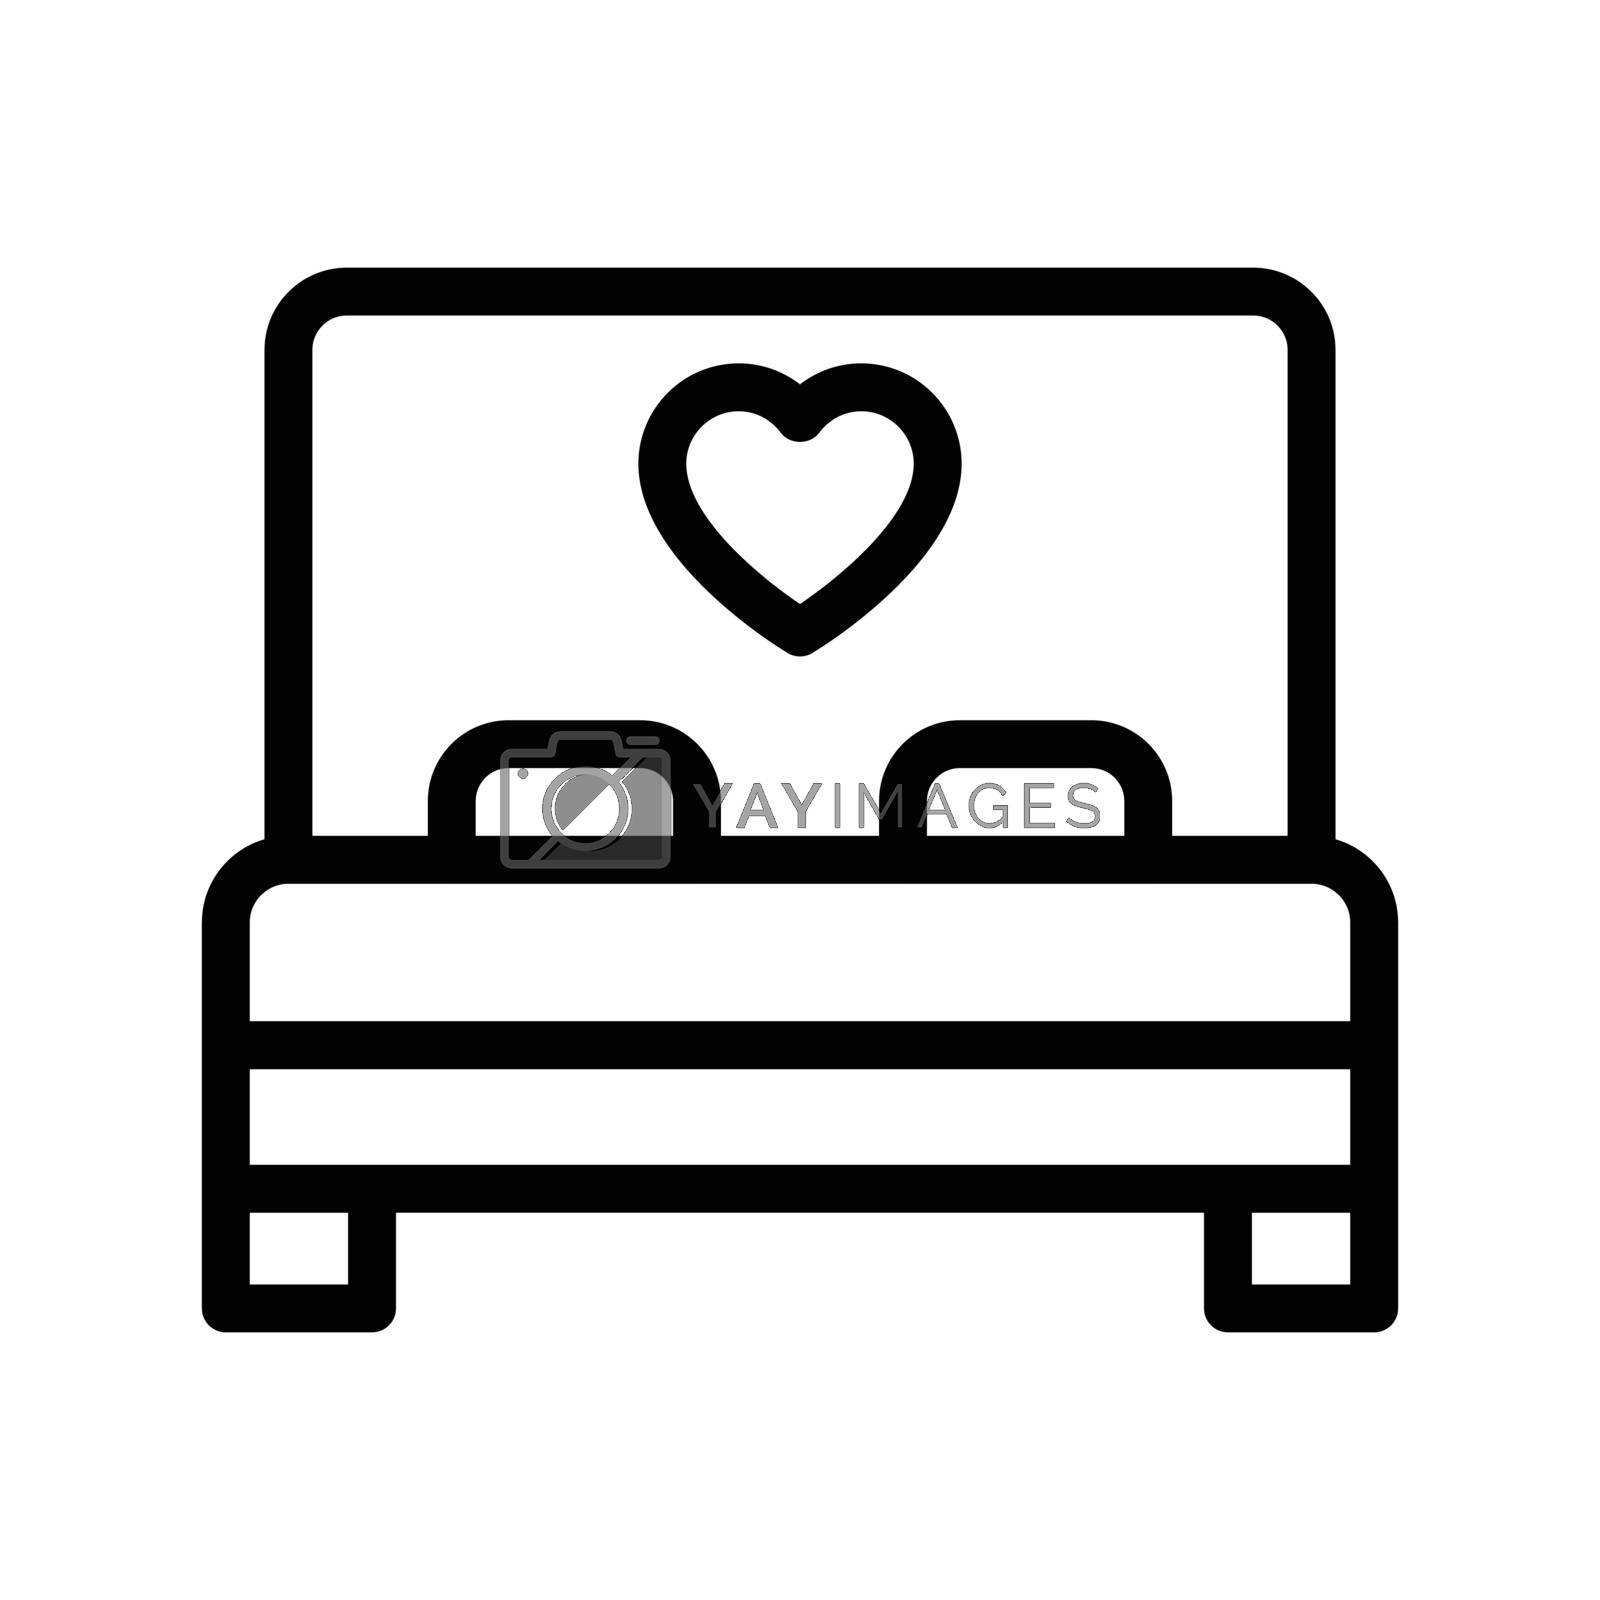 Royalty free image of romance by vectorstall